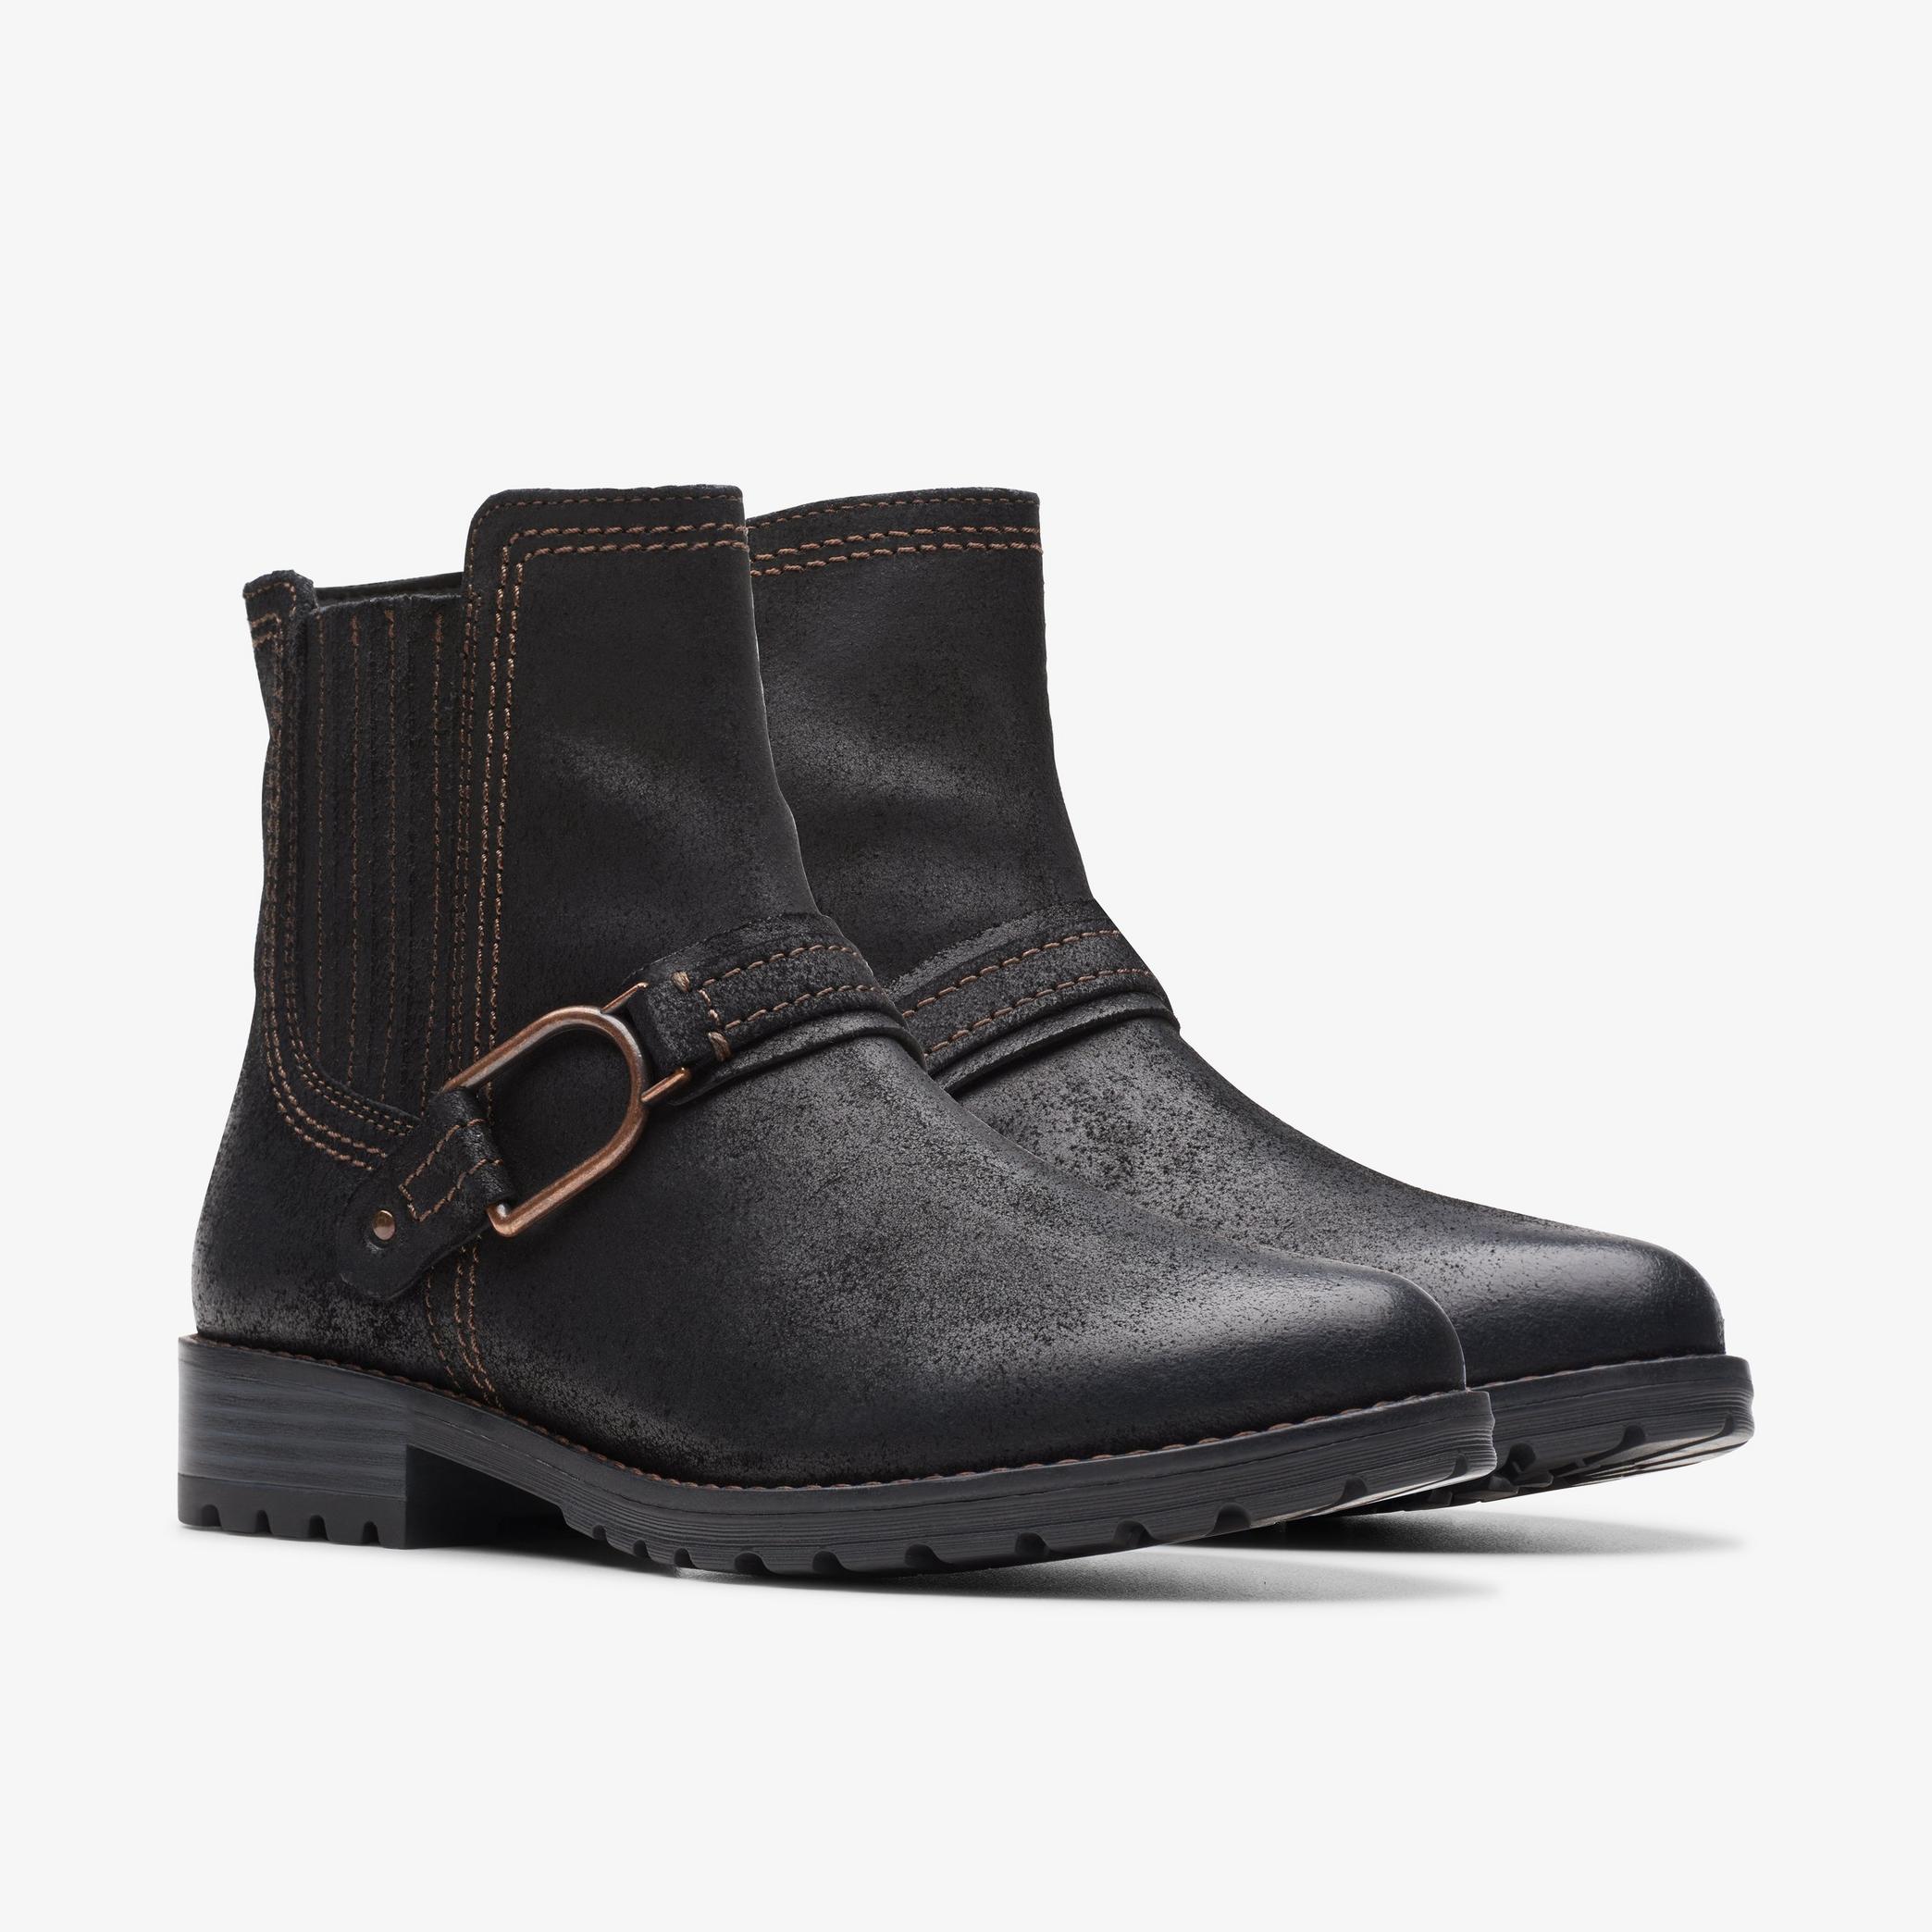 Aspra Buckle Black Suede Ankle Boots, view 5 of 7